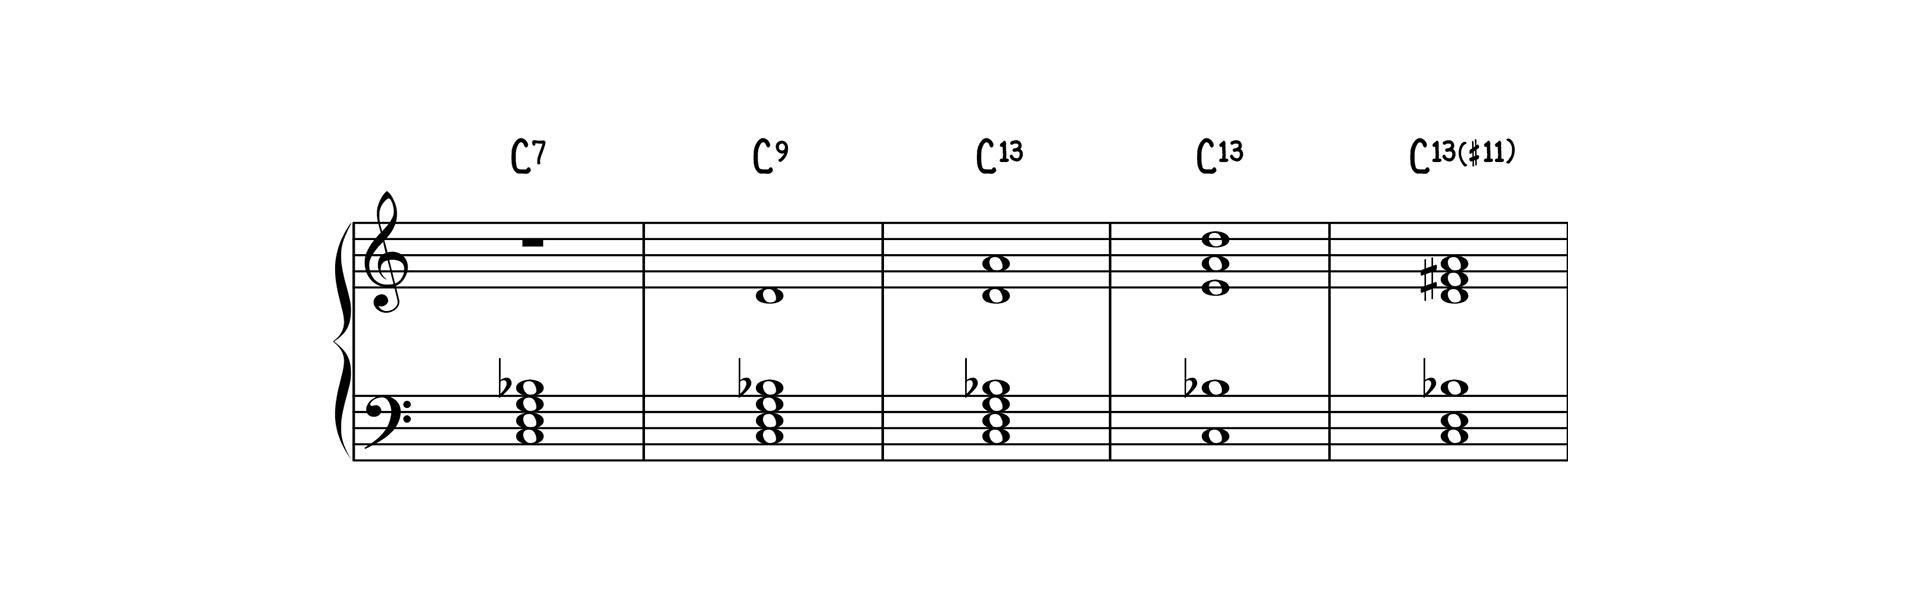 dominant extended chord voicings C7